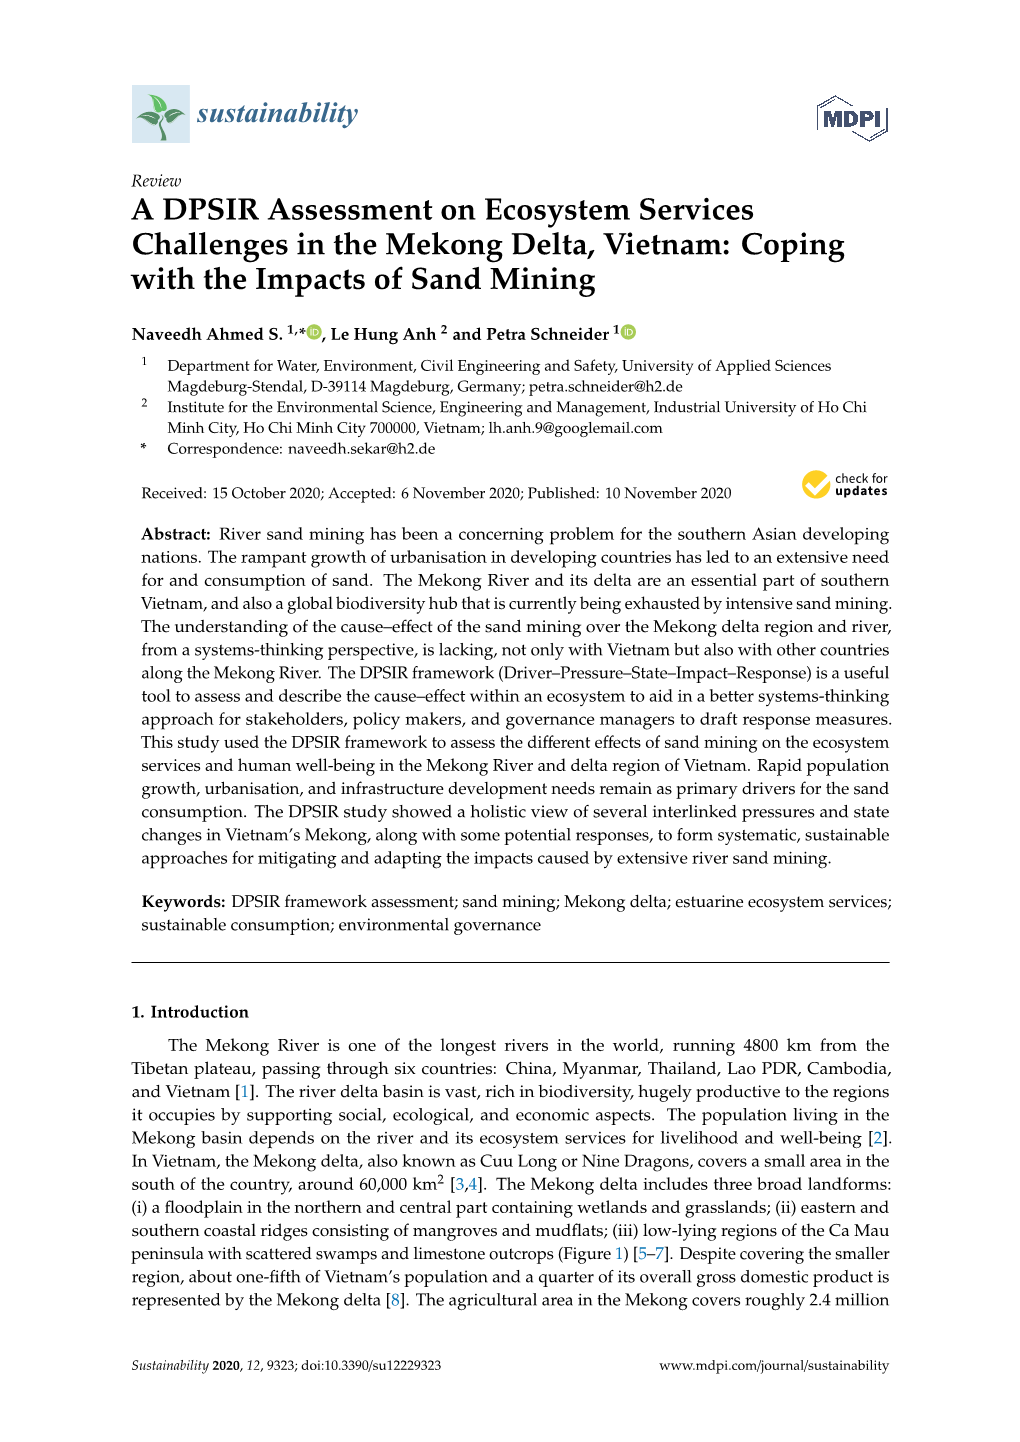 A DPSIR Assessment on Ecosystem Services Challenges in the Mekong Delta, Vietnam: Coping with the Impacts of Sand Mining